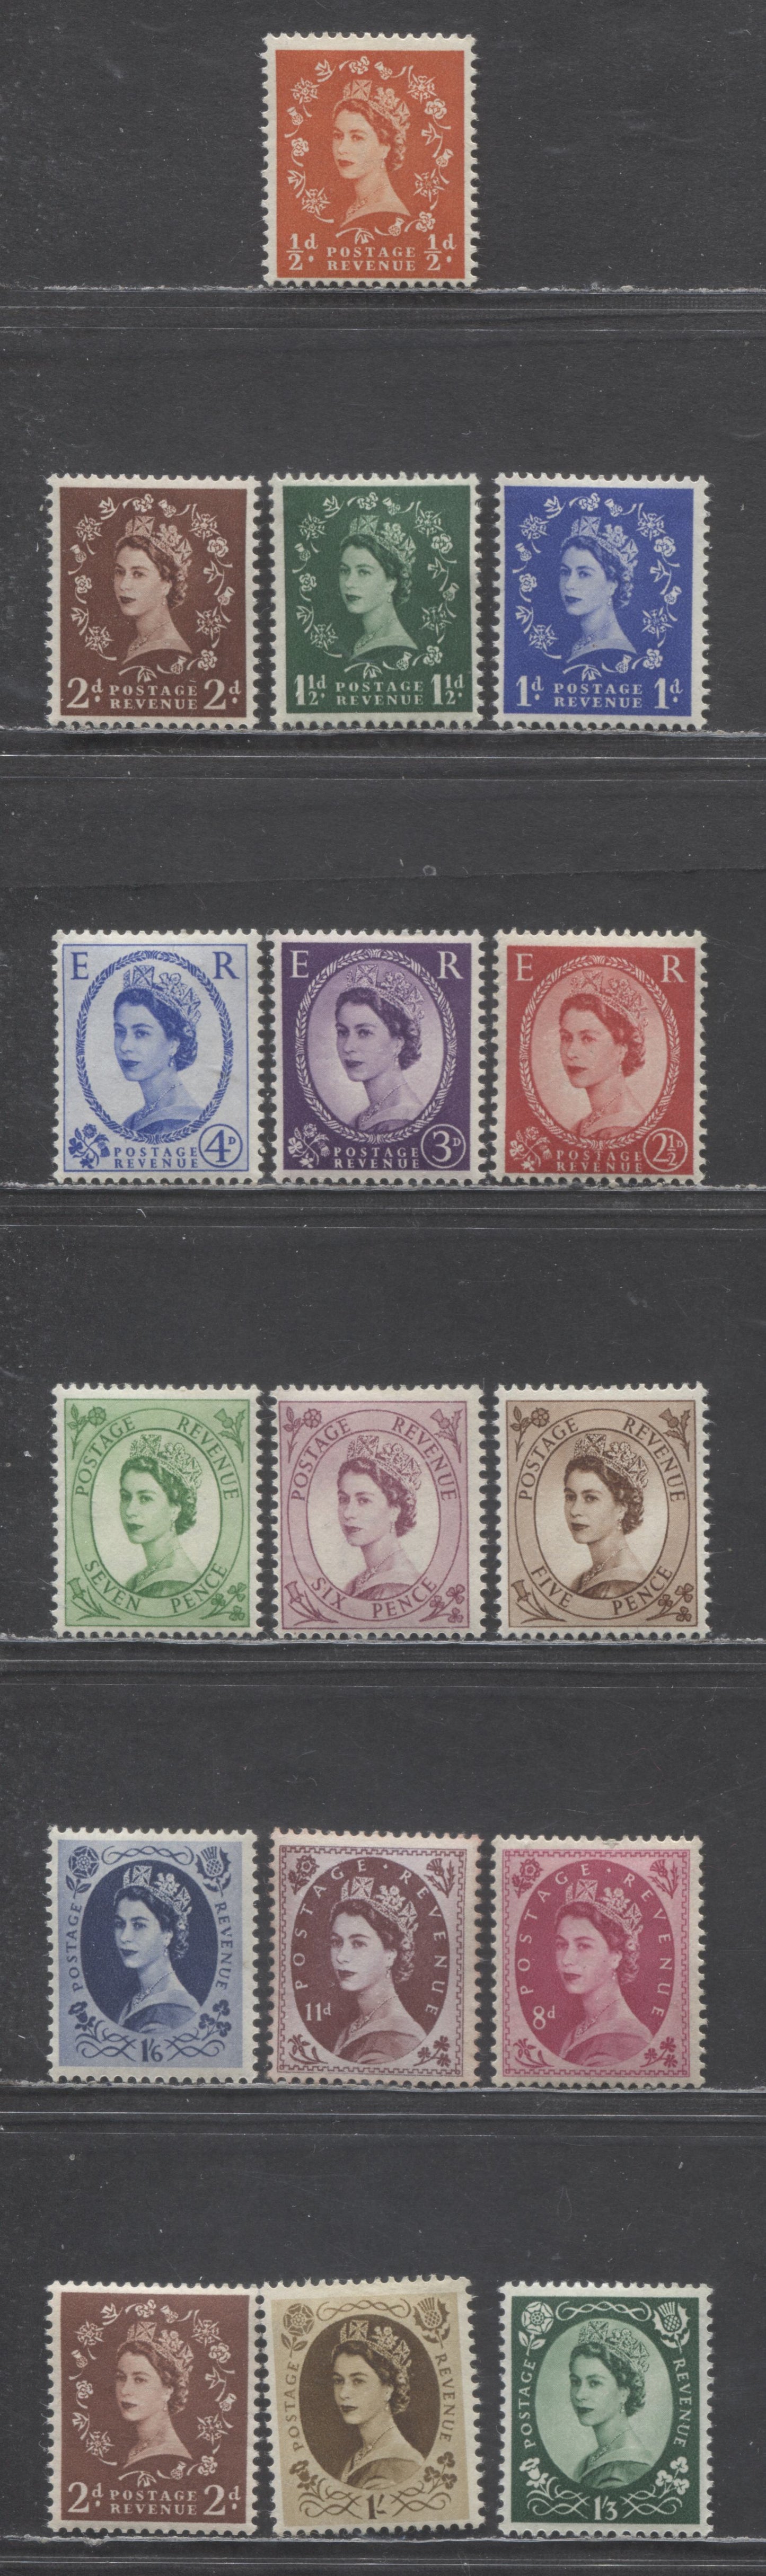 Lot 7 Great Britain SC#292/308 1952-1954 Wilding Issue, Tudor Crown Wmk, 15 F/VFOG Singles, Click on Listing to See ALL Pictures, Estimated Value $35